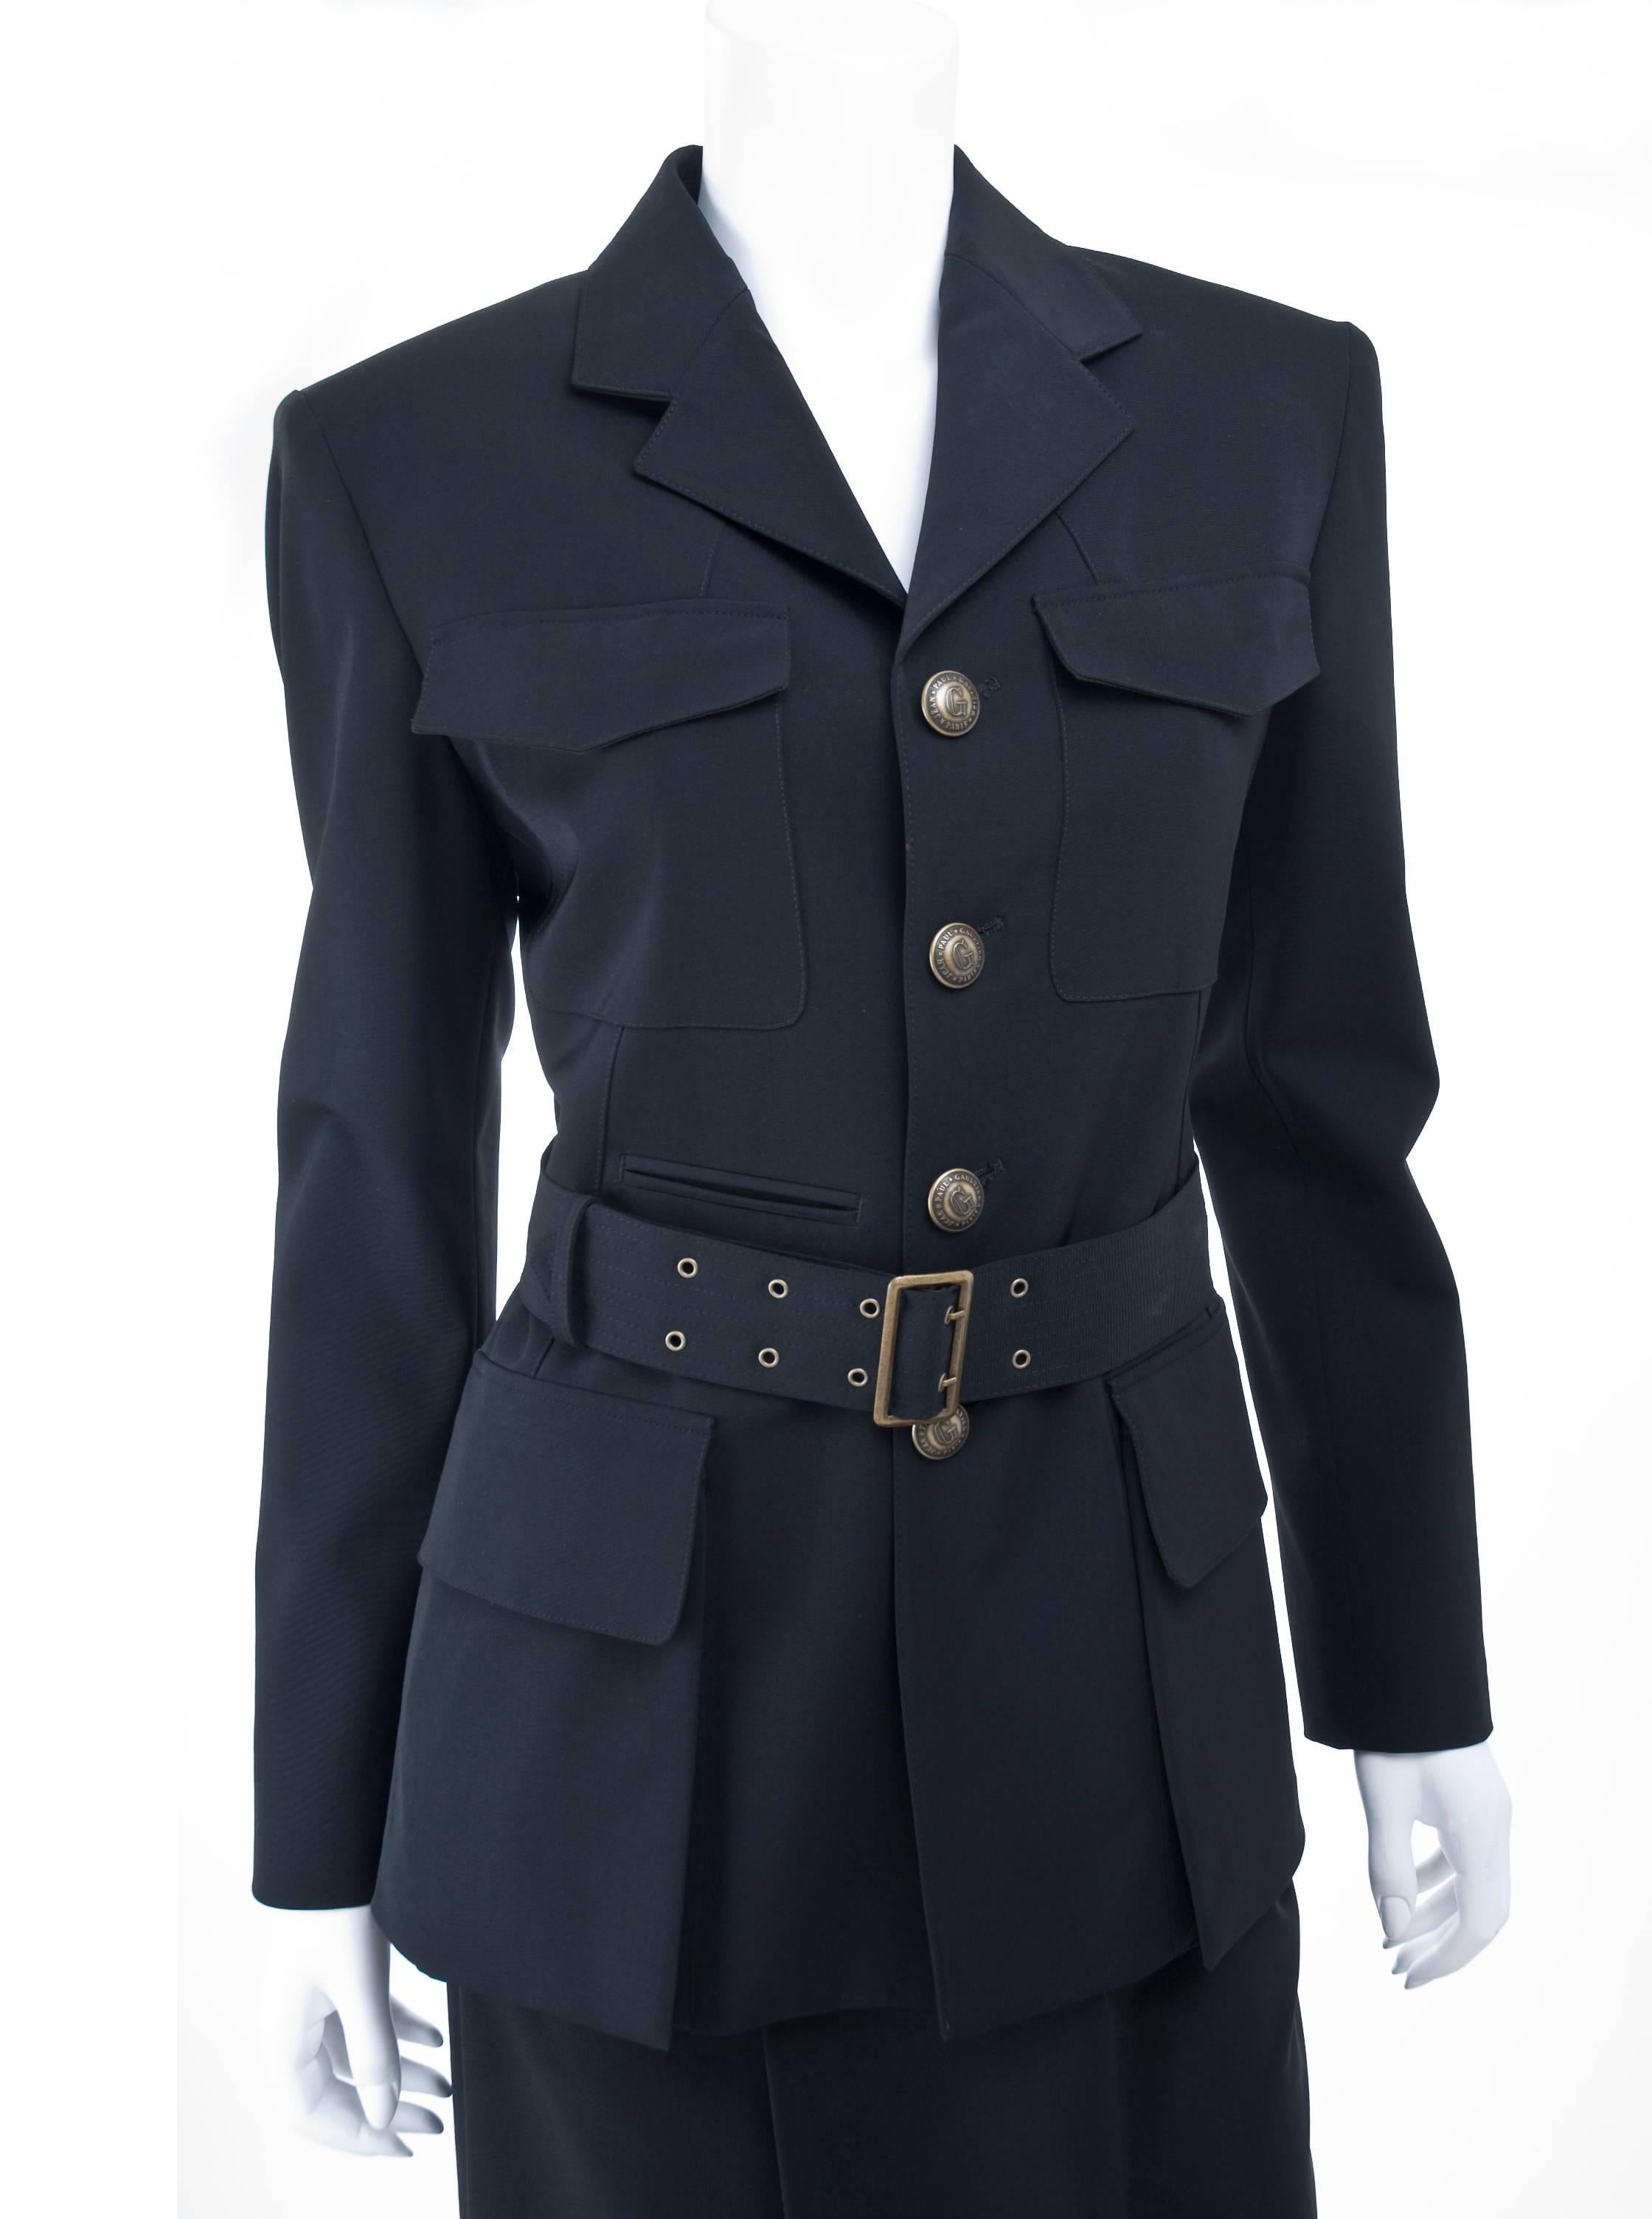 Jean Paul Gaultier Femme Suit from the 1993/94 Collection.
The skirt is a faux wrap, closure with zipper in the pleat and hook.
The Jacket is single buttoned and can be worn with the belt.
Excellent condition.
Size US 10 - 44 IT
Measurements:
Skirt